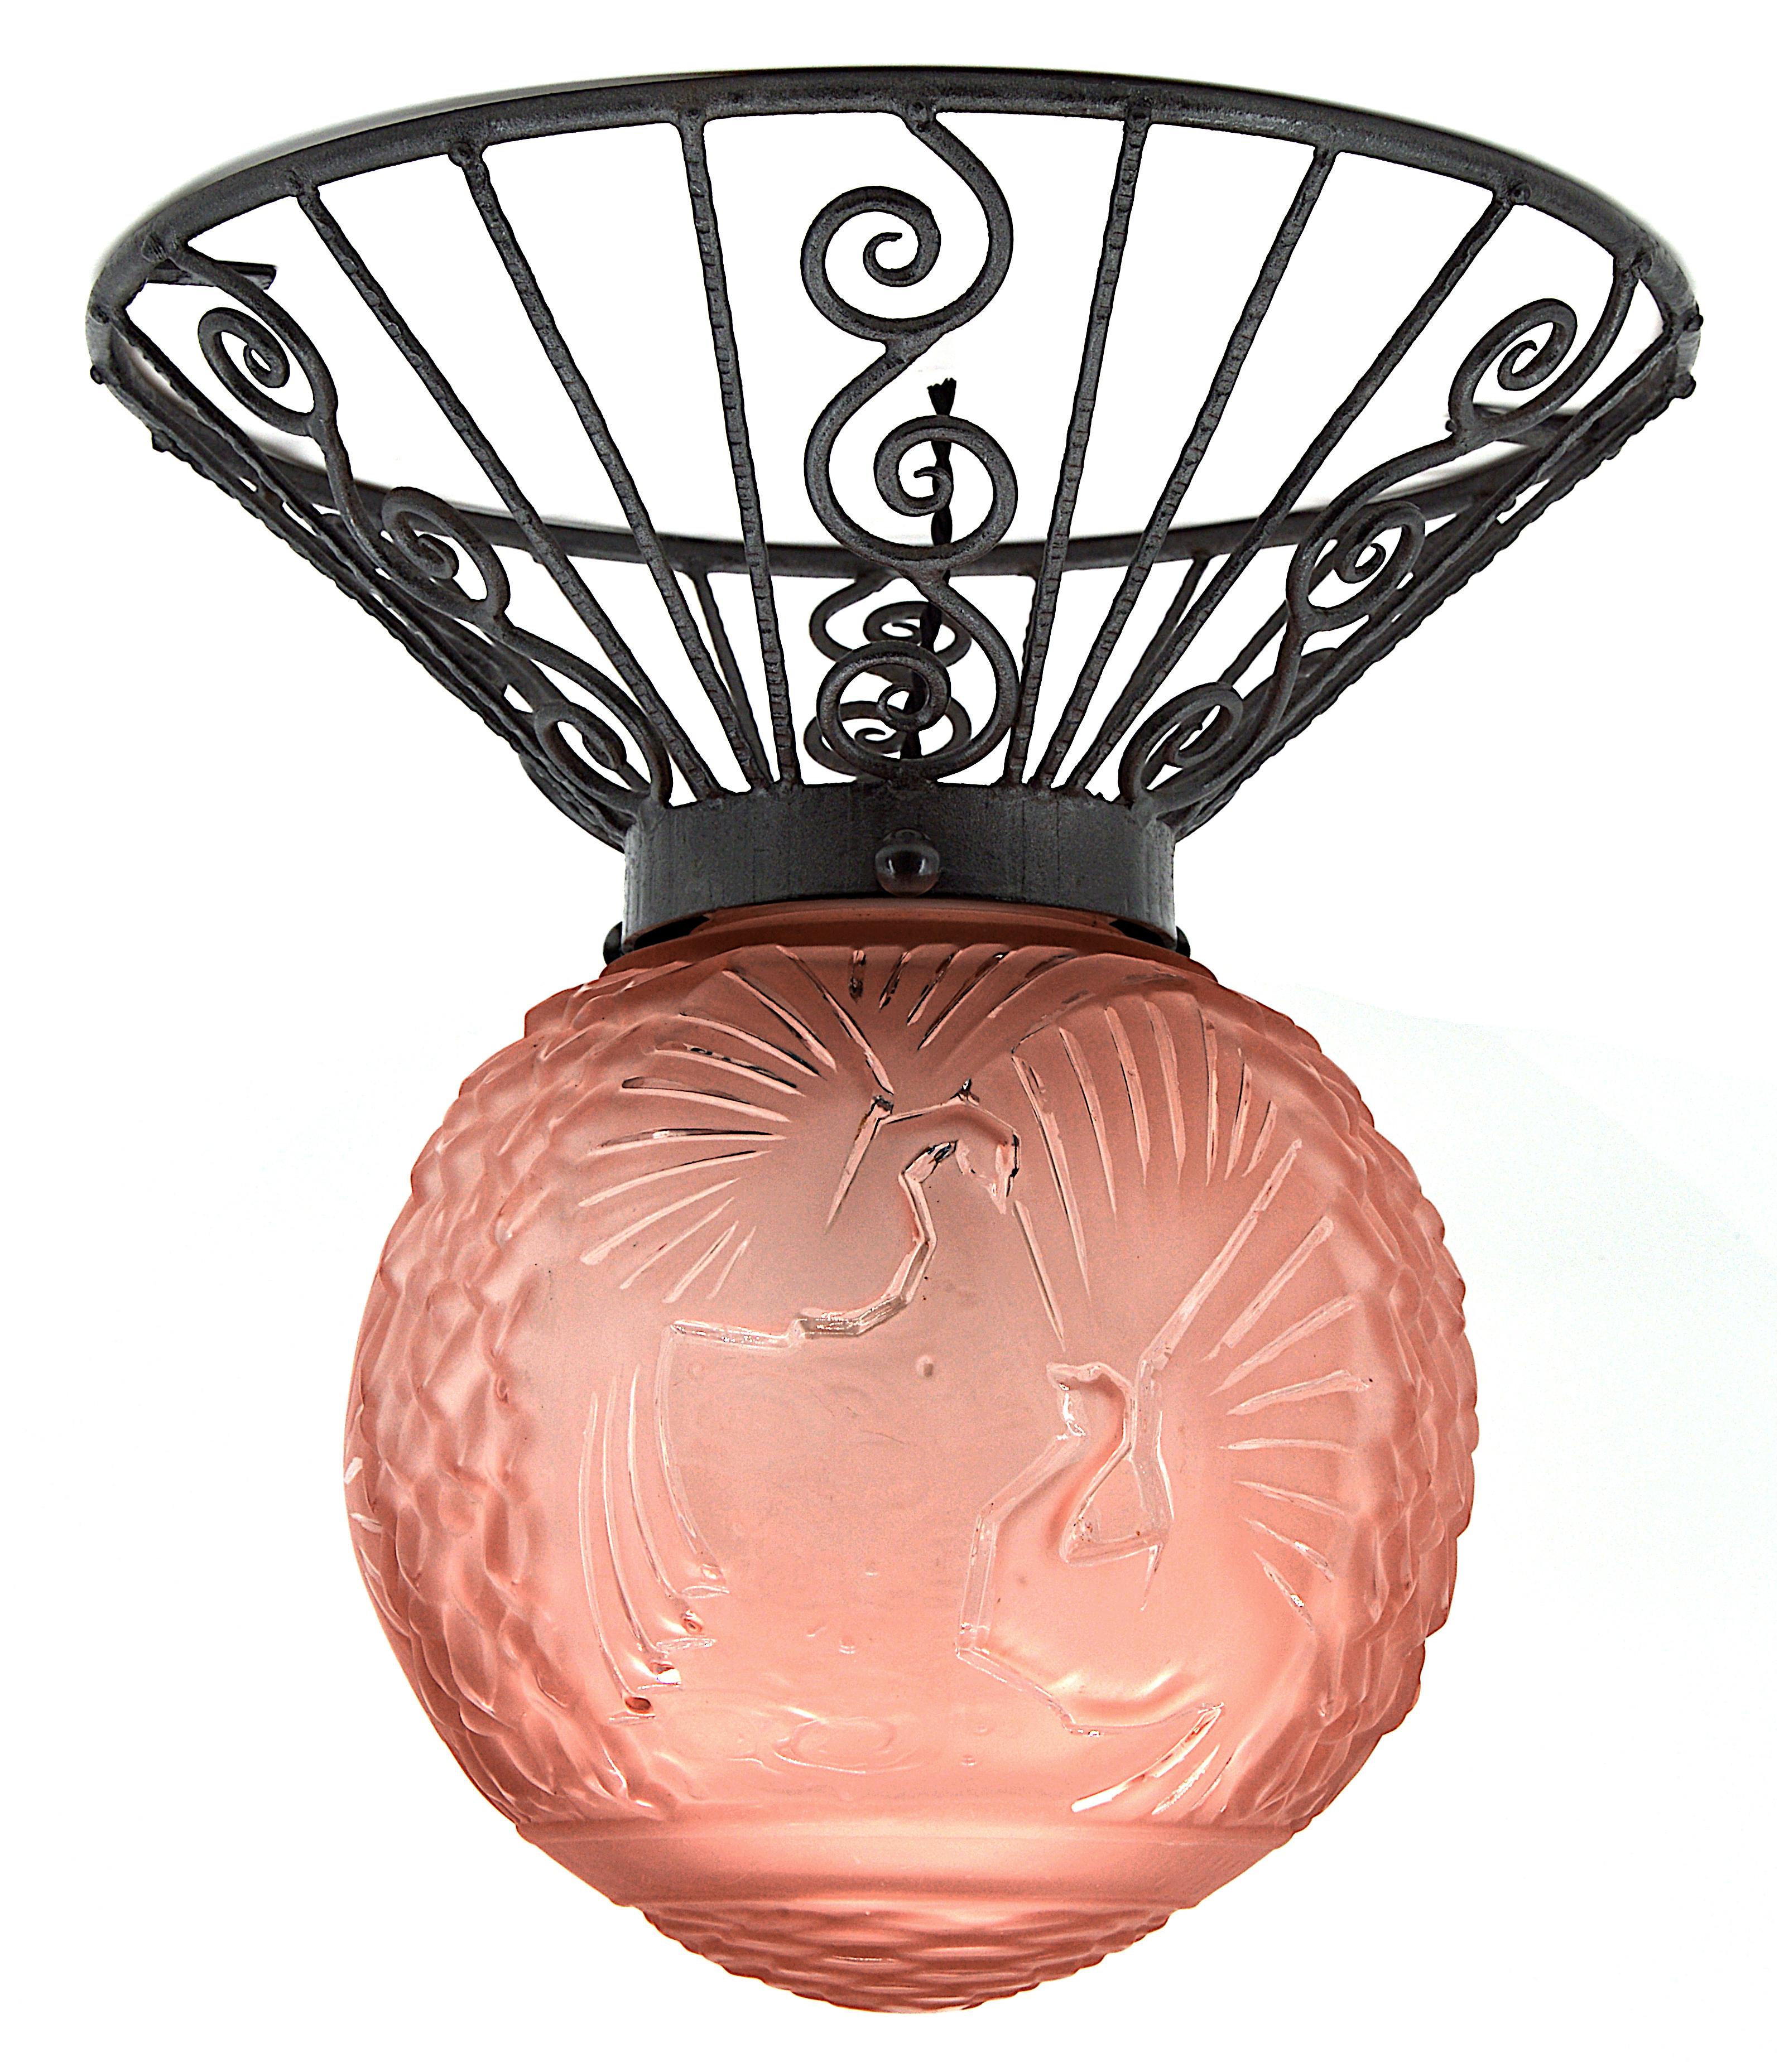 French Art Deco flushmount by Muller Frères (Luneville), France, early 1920s. Thick and large pink frosted glass shade with its iron fixture. 6 paradise birds in the sky. Measures: Height 15.5